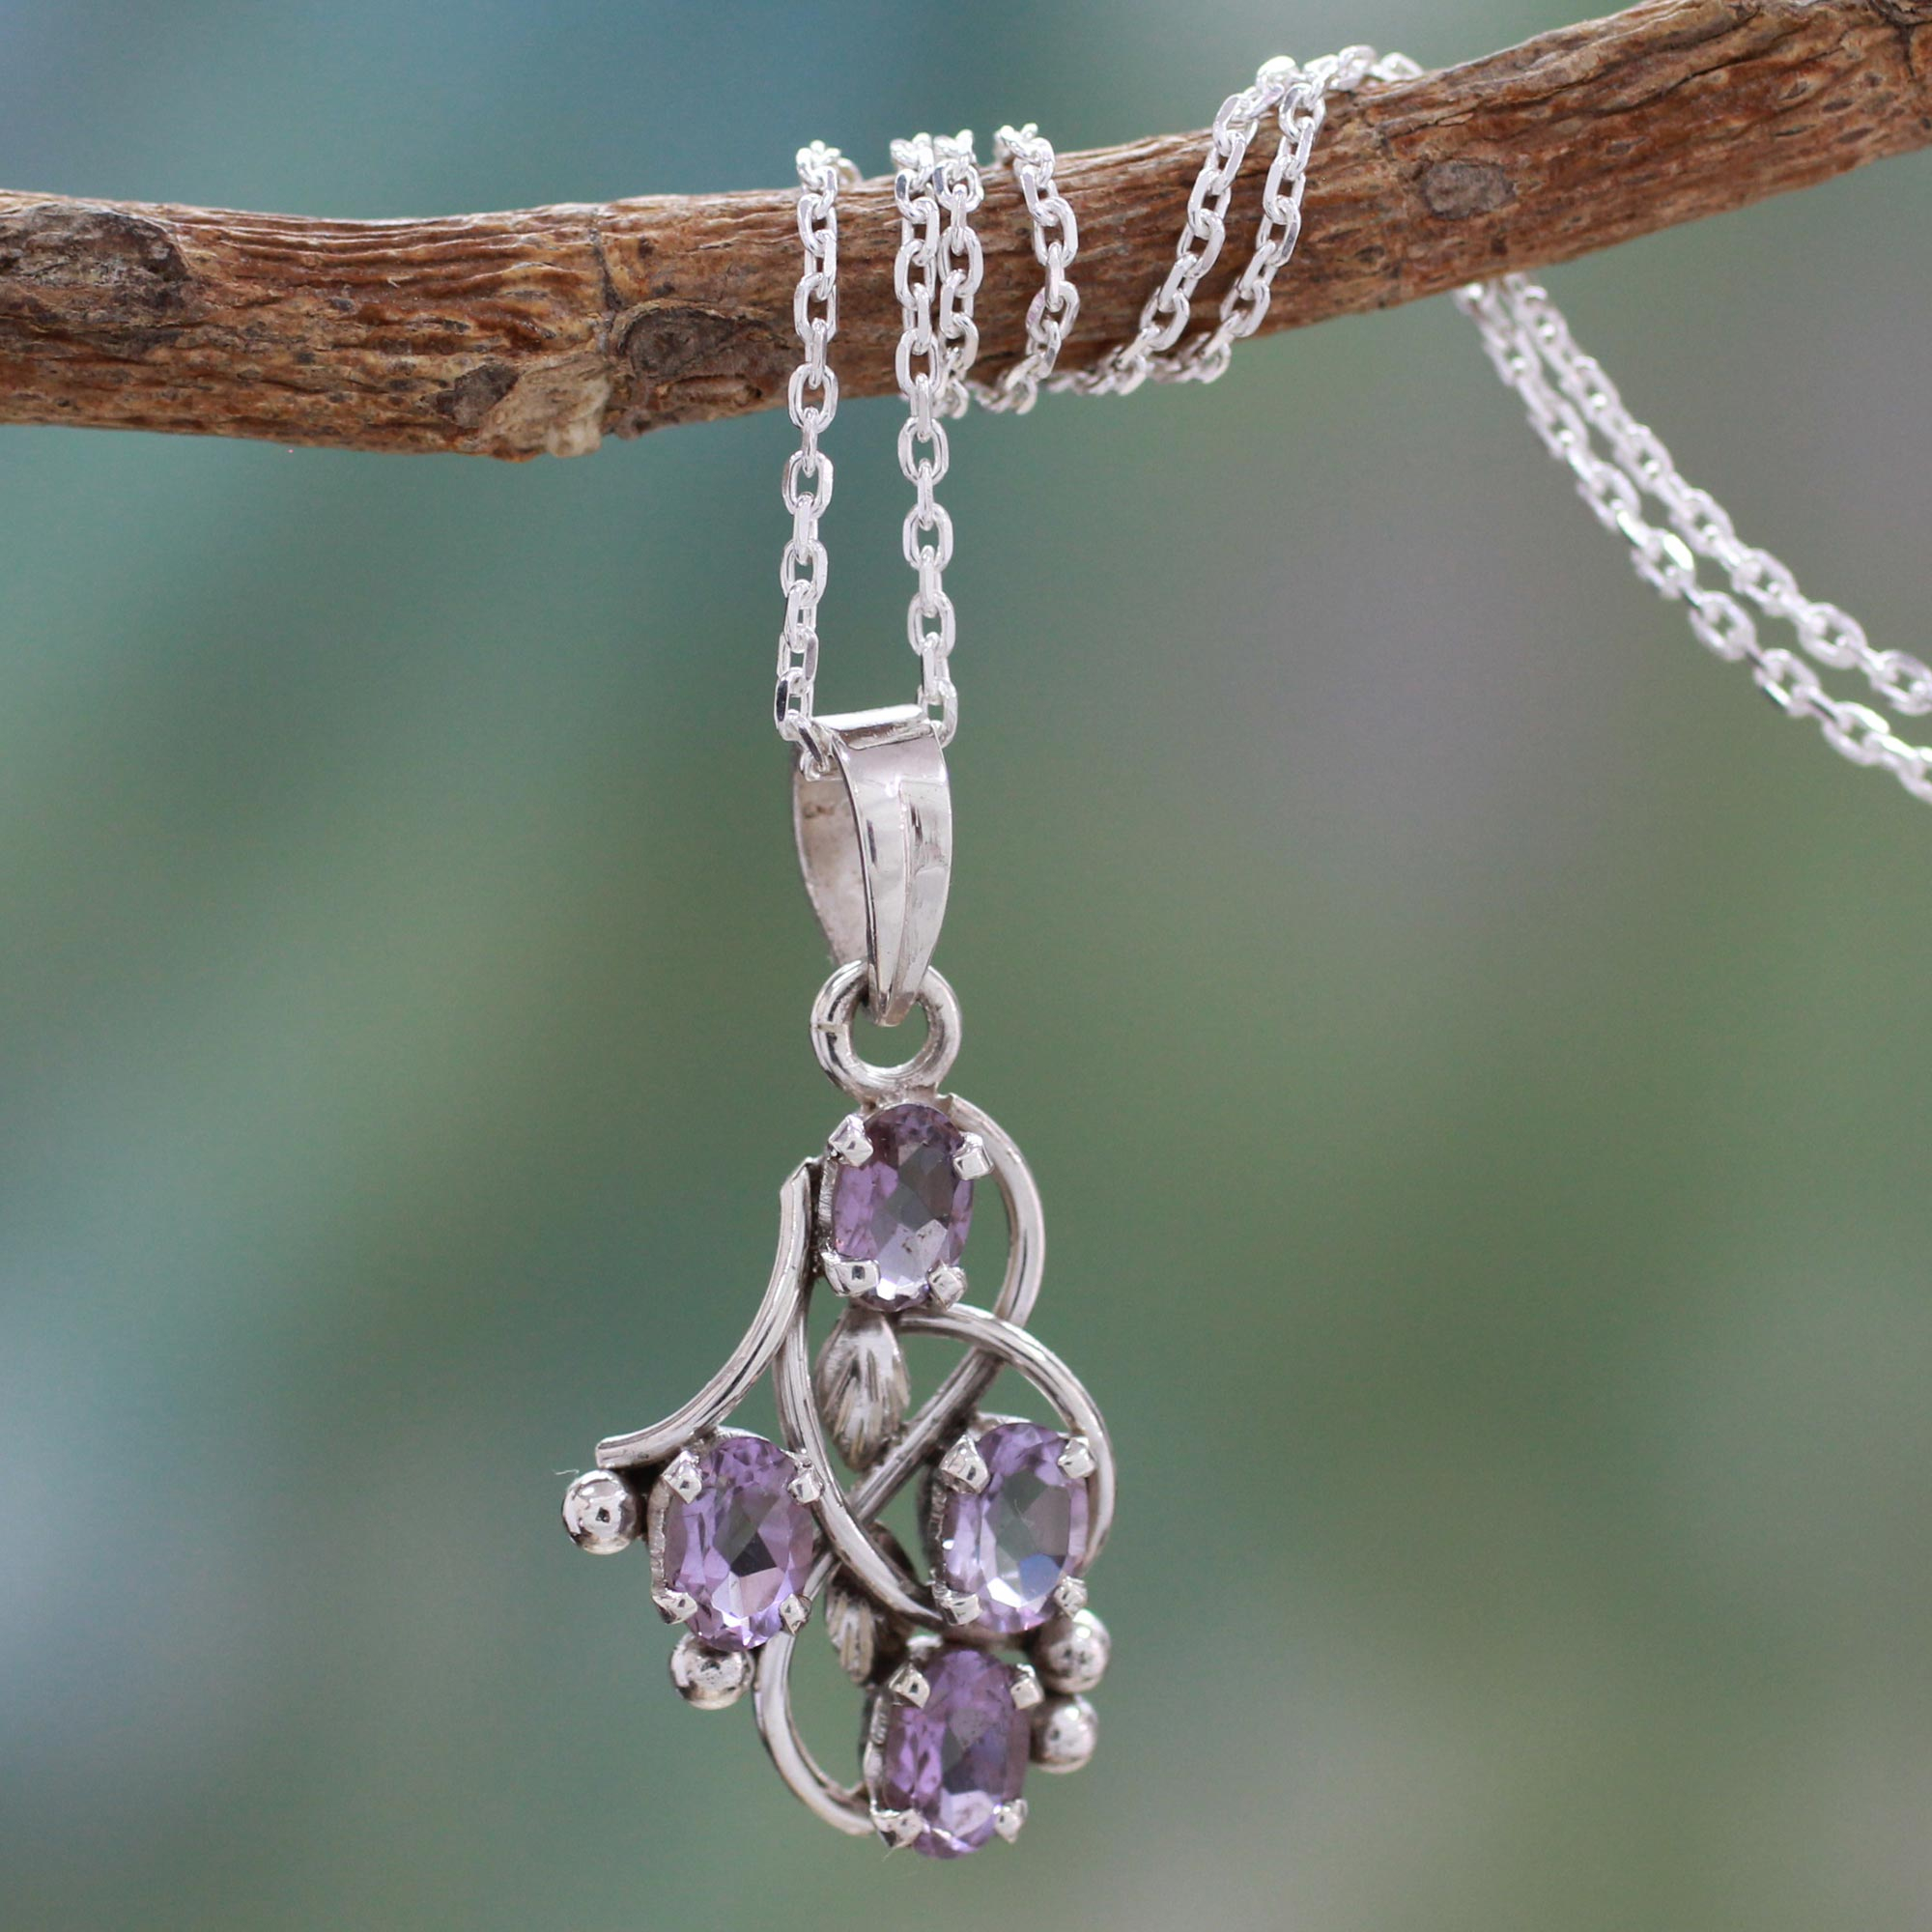 Amethyst and Sterling Silver Necklace India Jewelry - Twirling | NOVICA